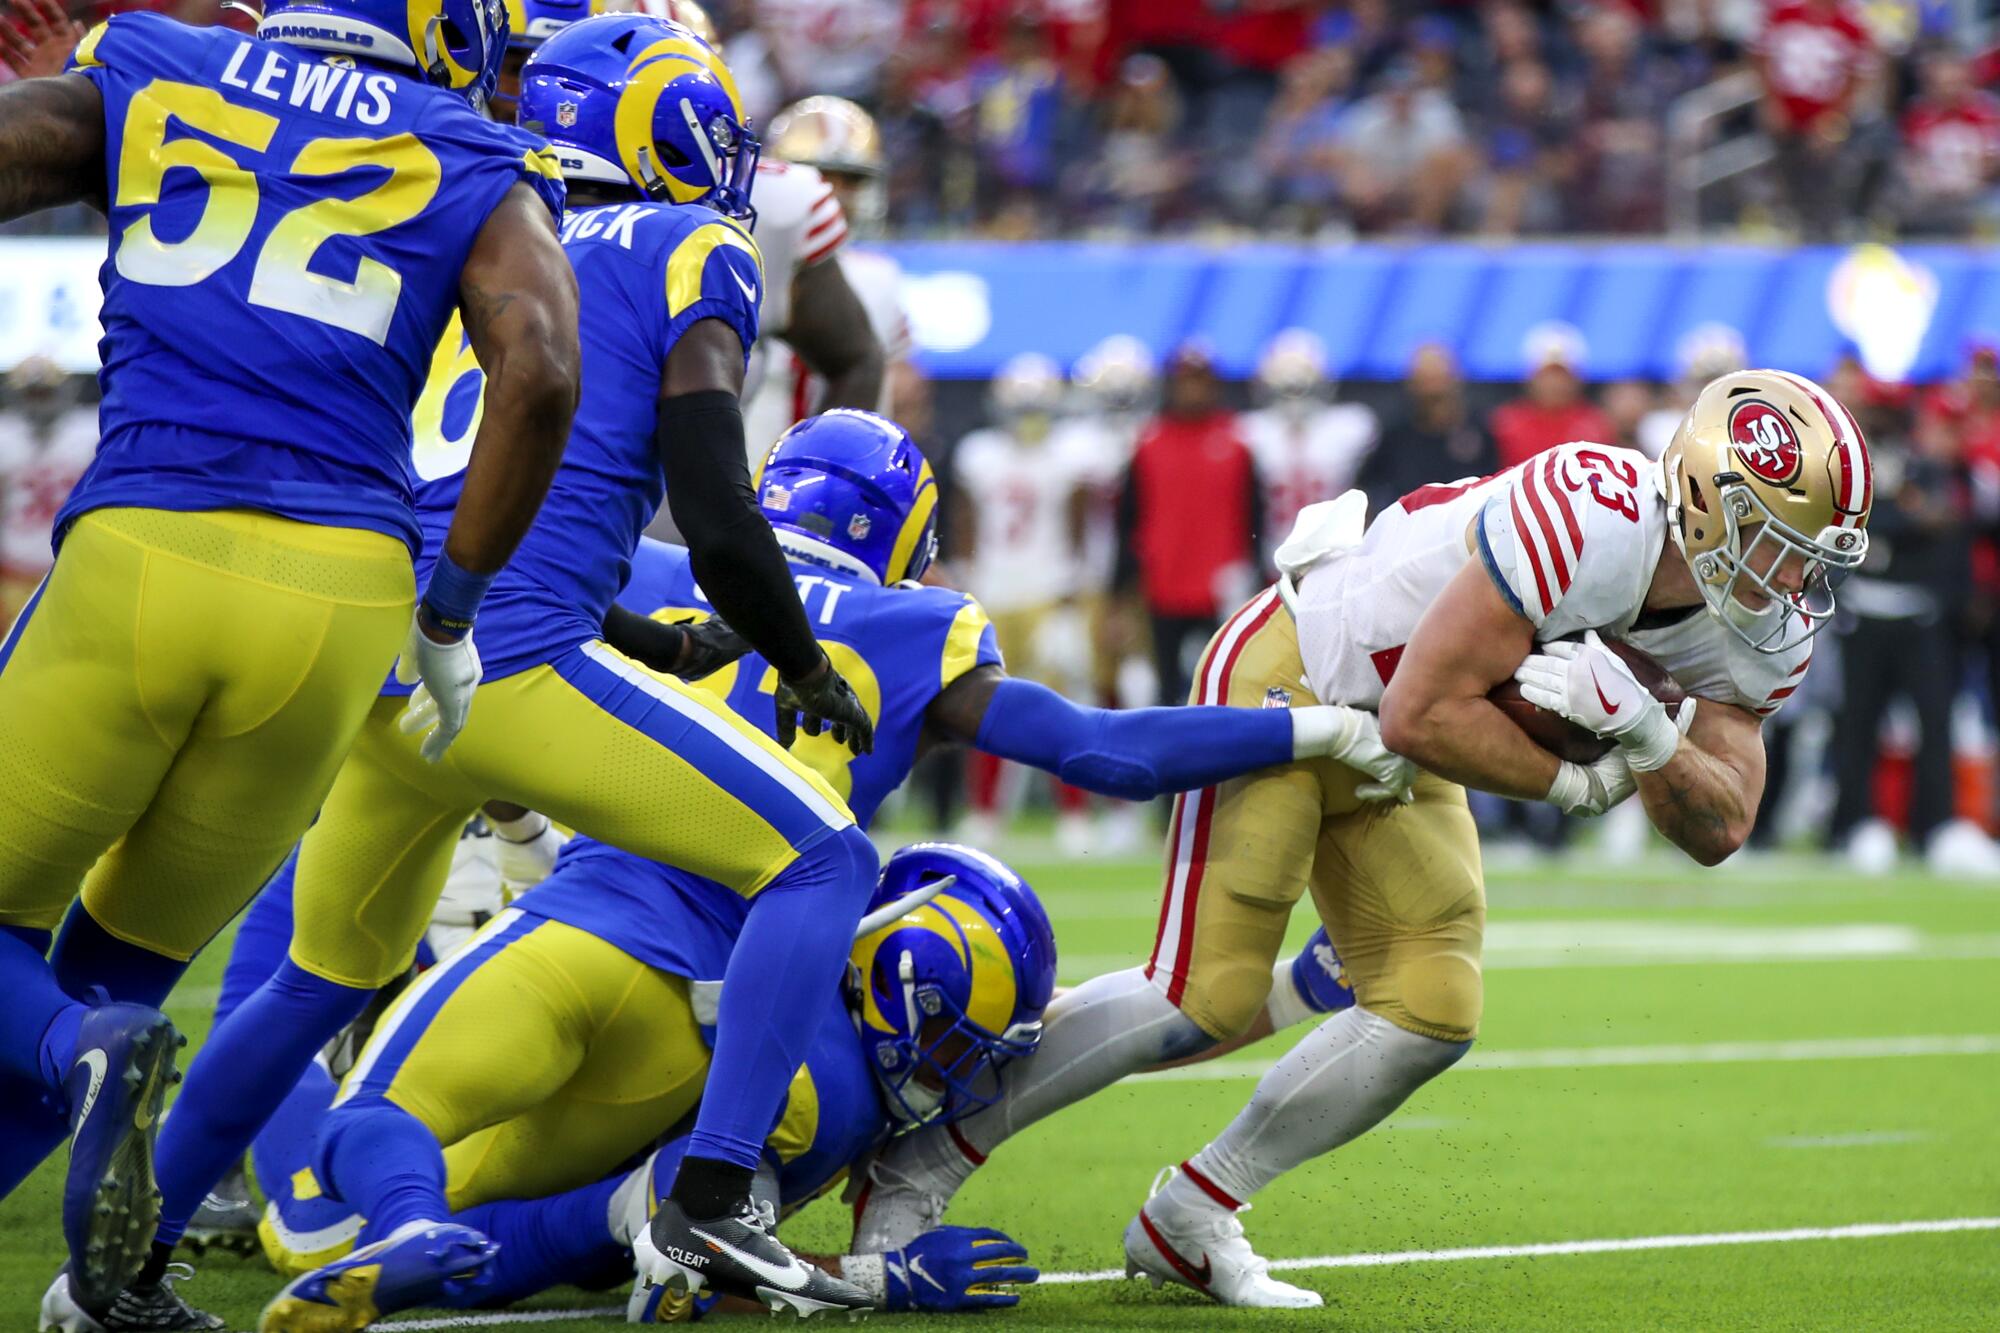 San Francisco 49ers running back Christian McCaffrey breaks away from the Rams defense in the fourth quarter.